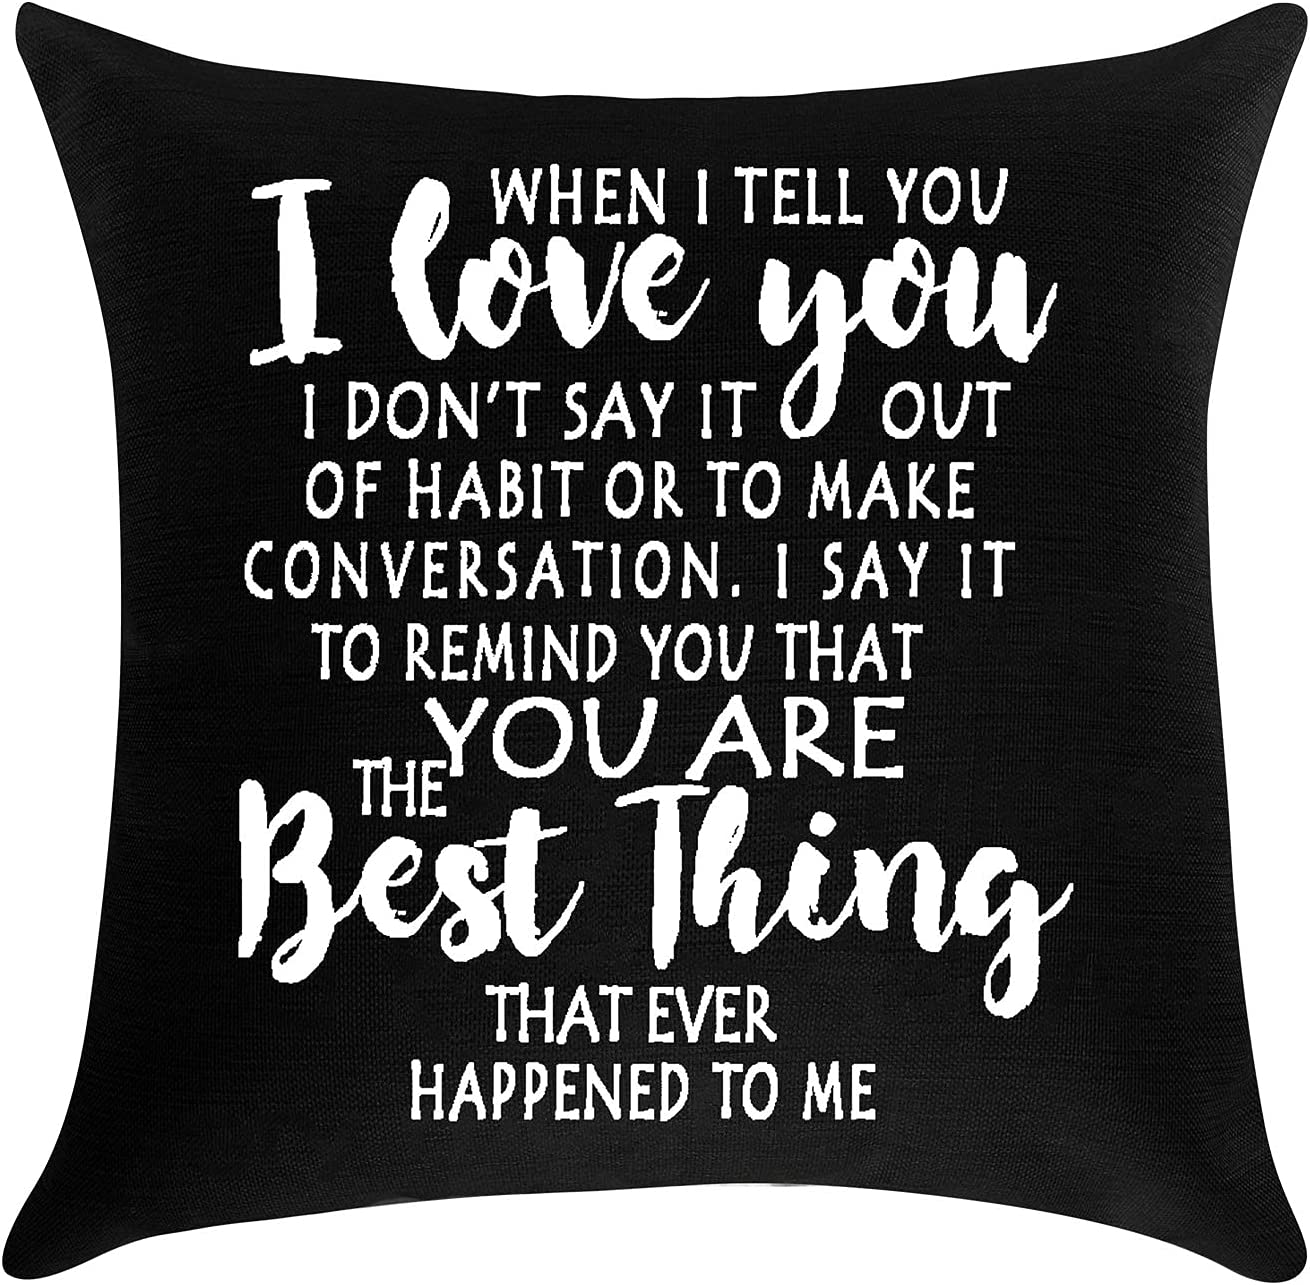 When I Tell You I Love You Pillow